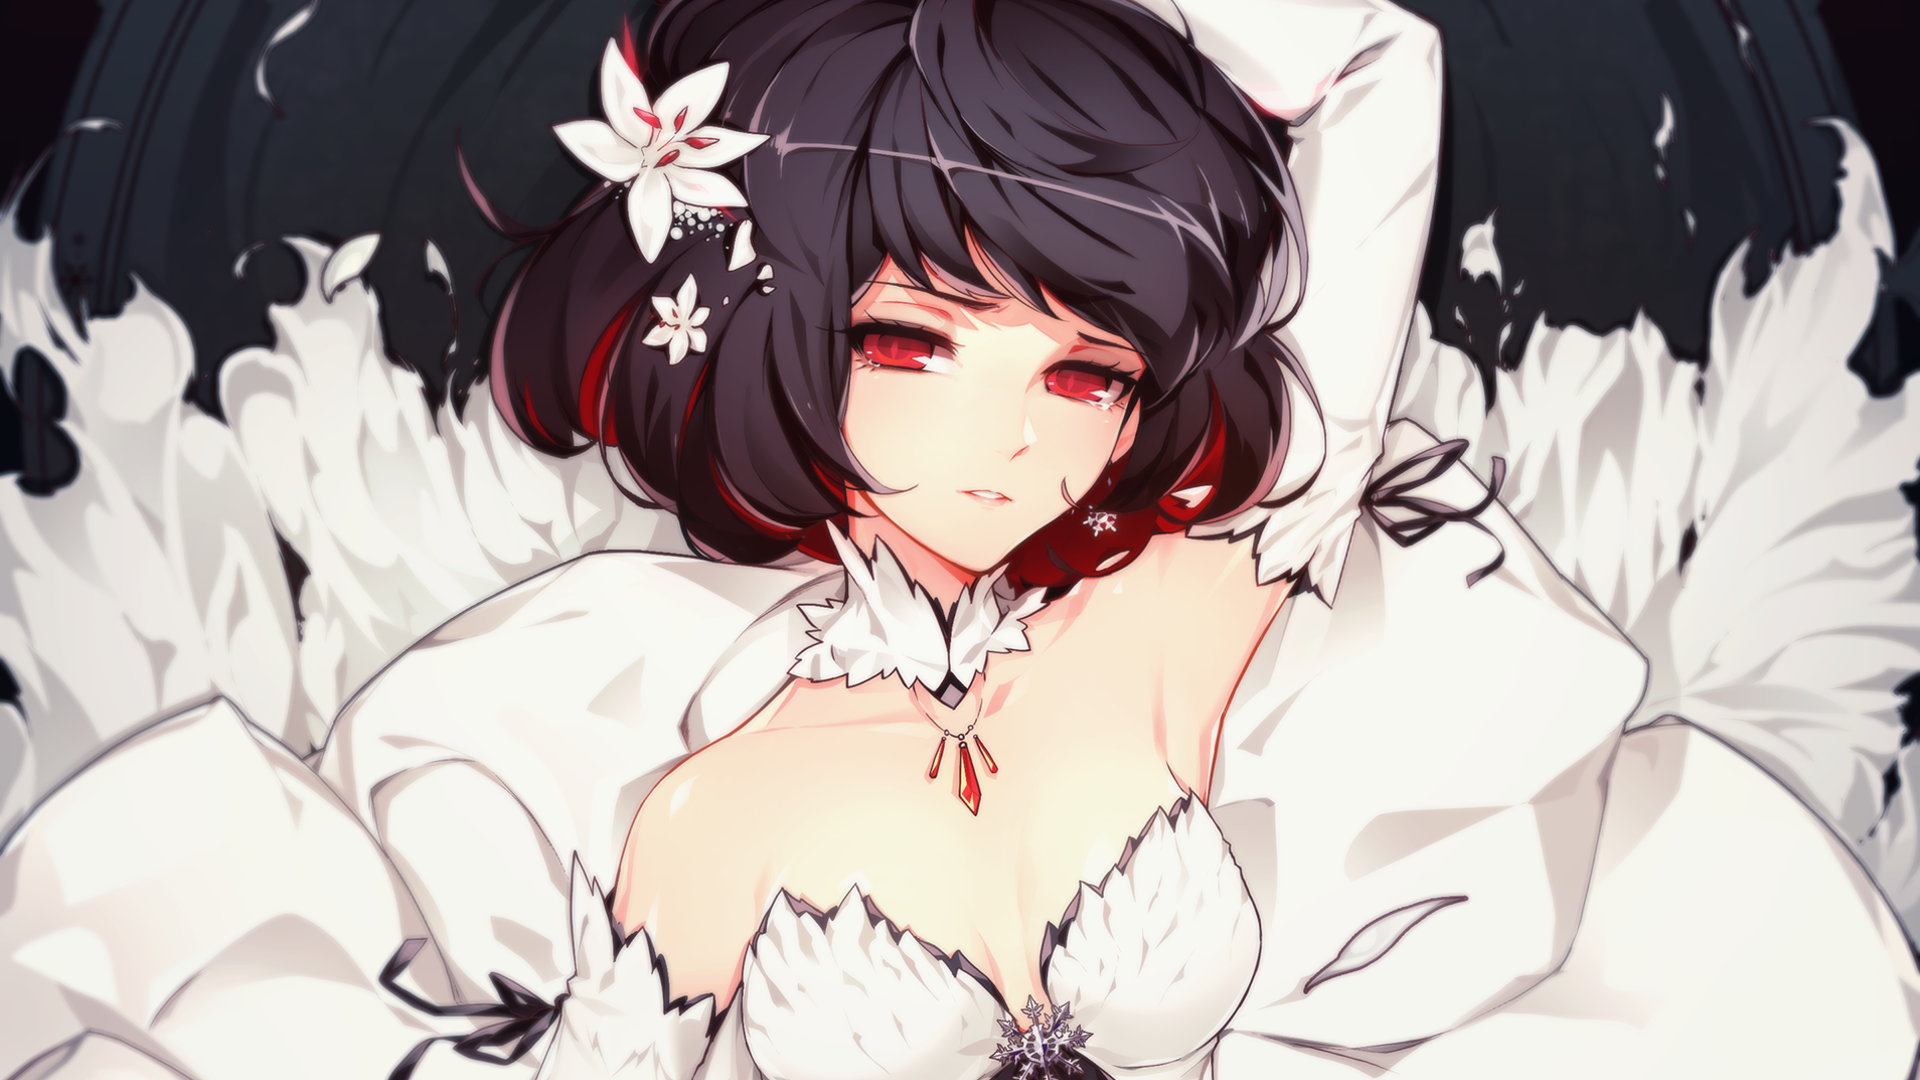 Anime 1920x1080 anime girls red eyes Snow White anime black hair flower in hair arms up necklace looking at viewer fantasy art fantasy girl